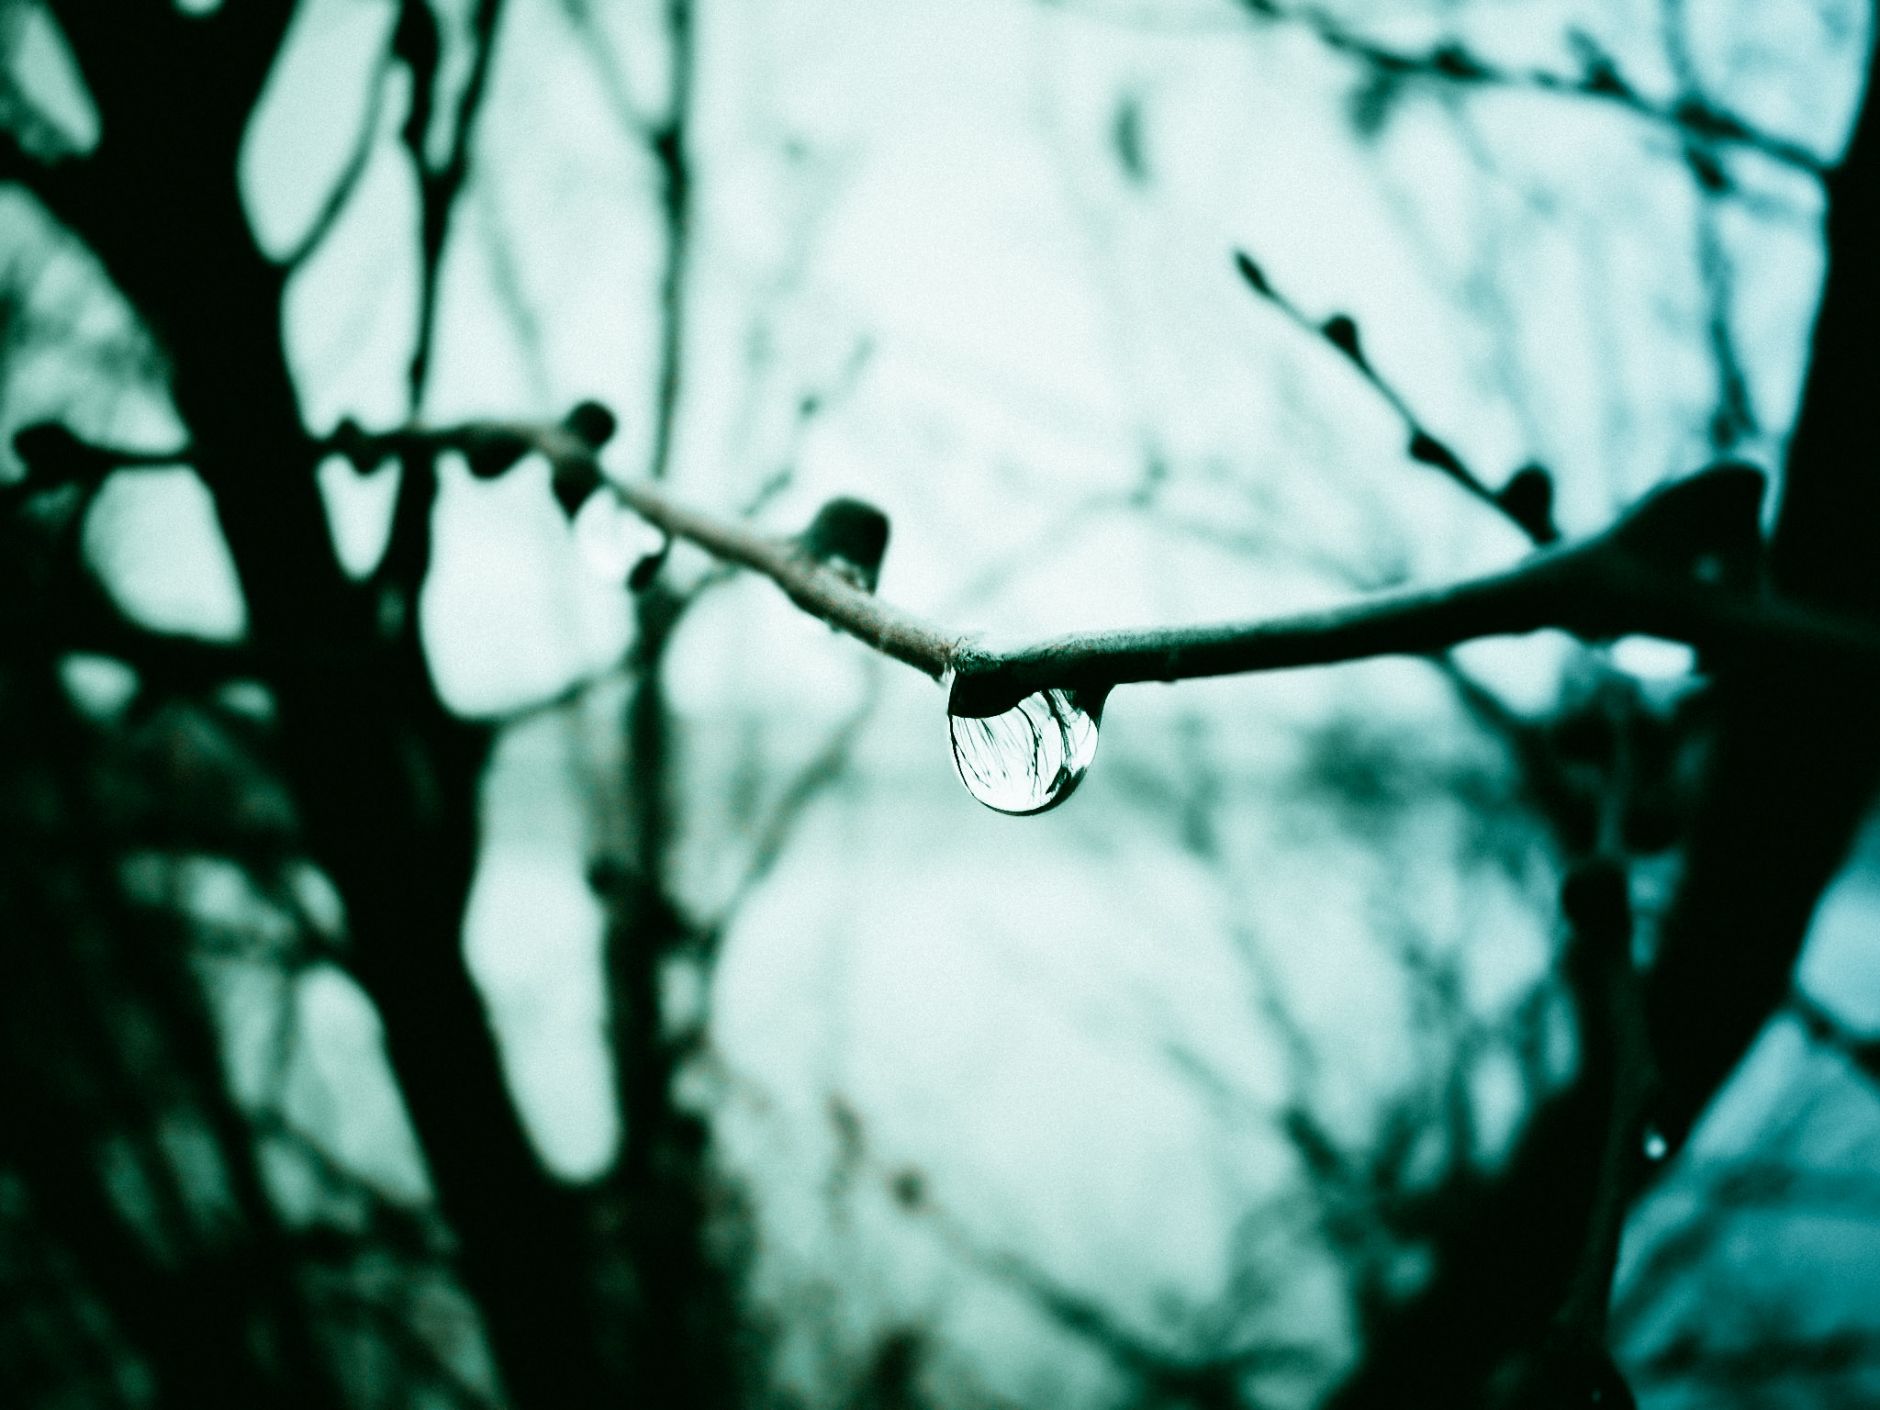 Water drop attached on branch in front of a river